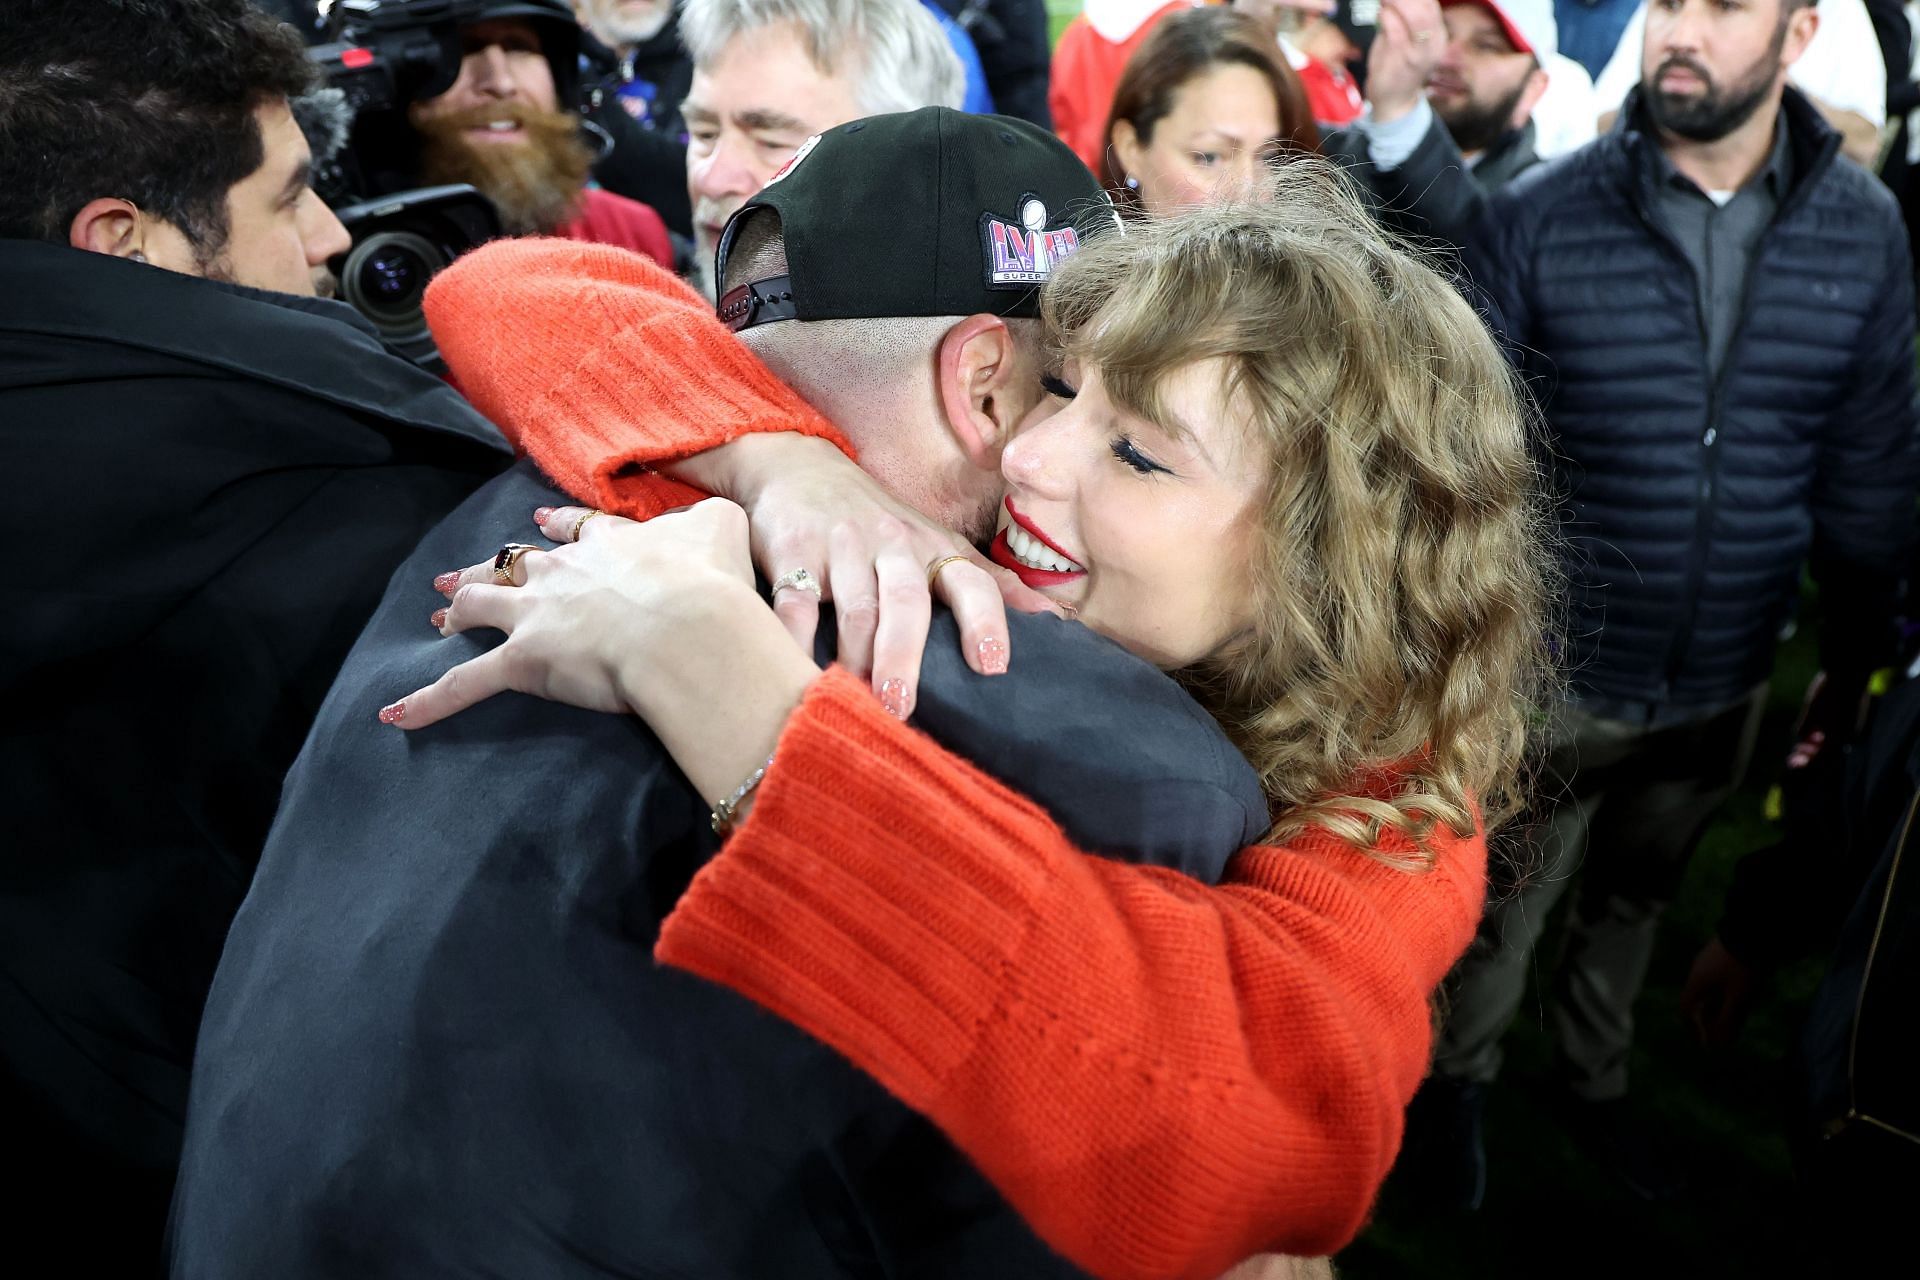 Will Taylor Swift make it to the Super Bowl?